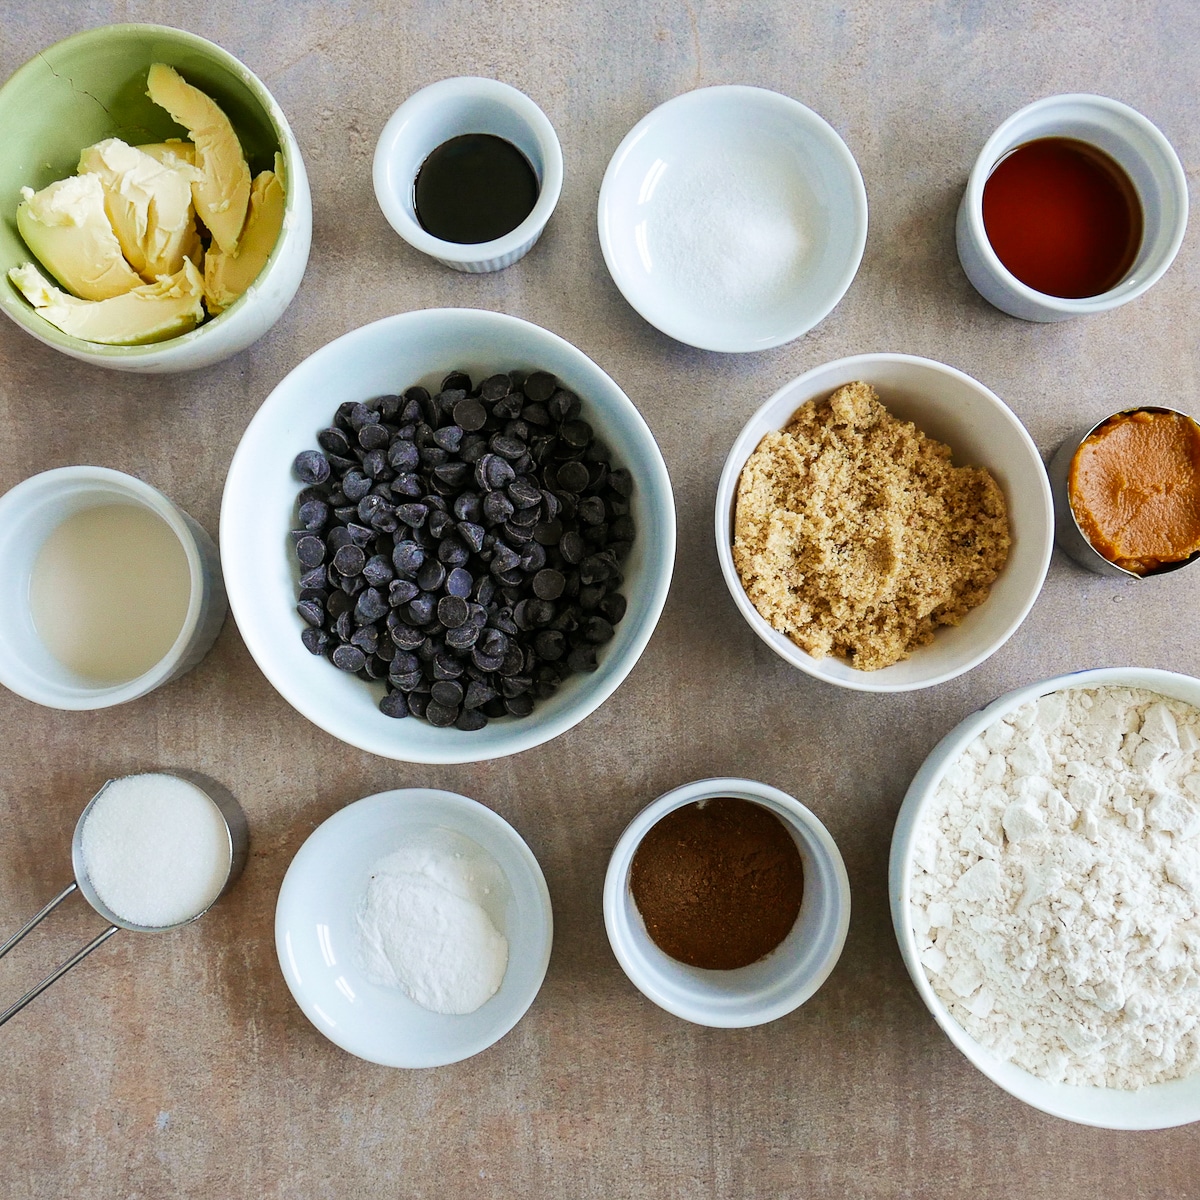 recipe ingredients arranged on a table.